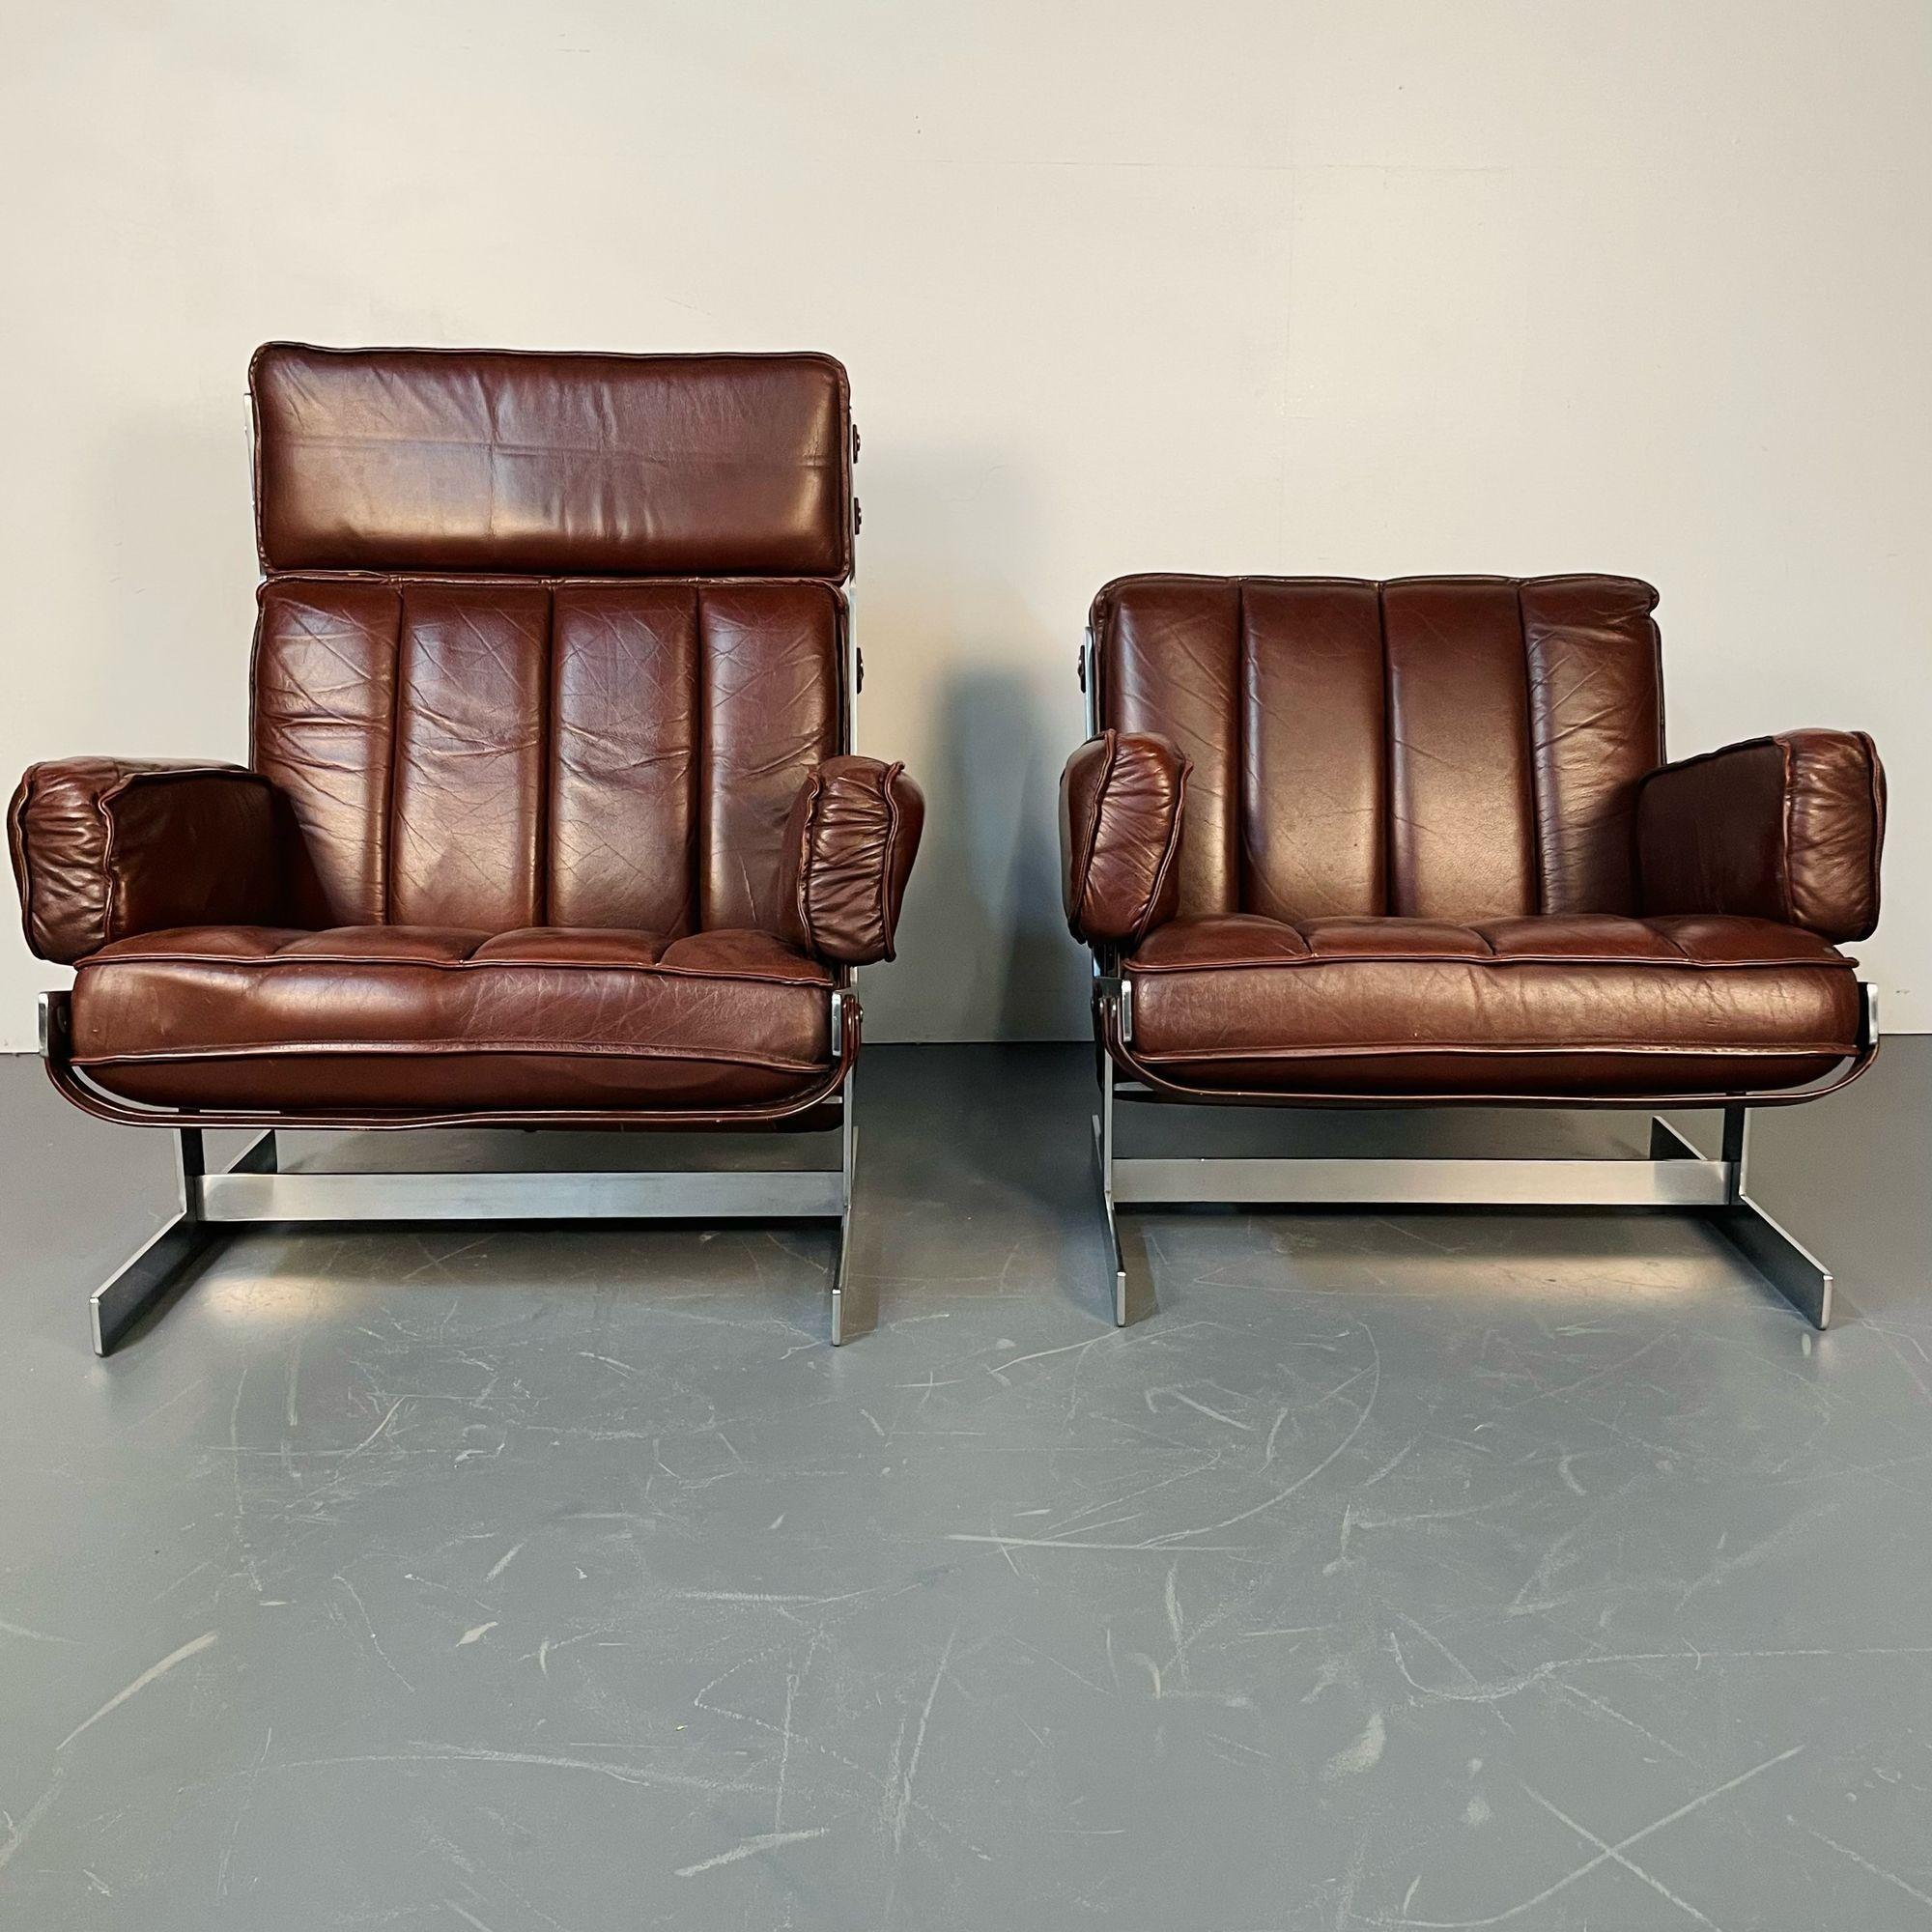 Mid-20th Century Arne Norell, Swedish Mid-Century Modern Lounge Chairs, Leather, Steel, 1960s For Sale